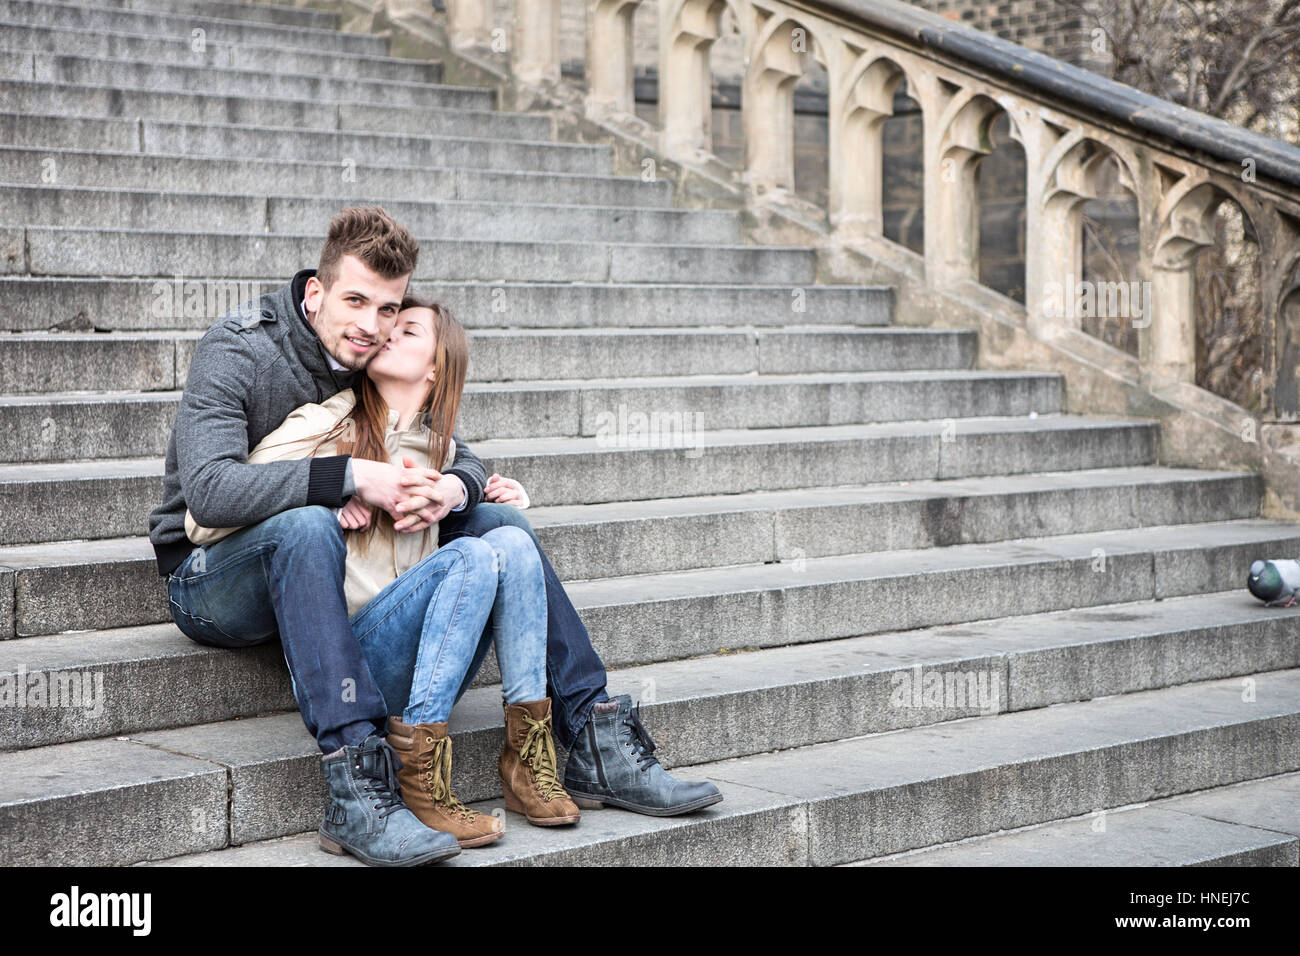 Full length of loving woman kissing man while sitting on steps outdoors Stock Photo